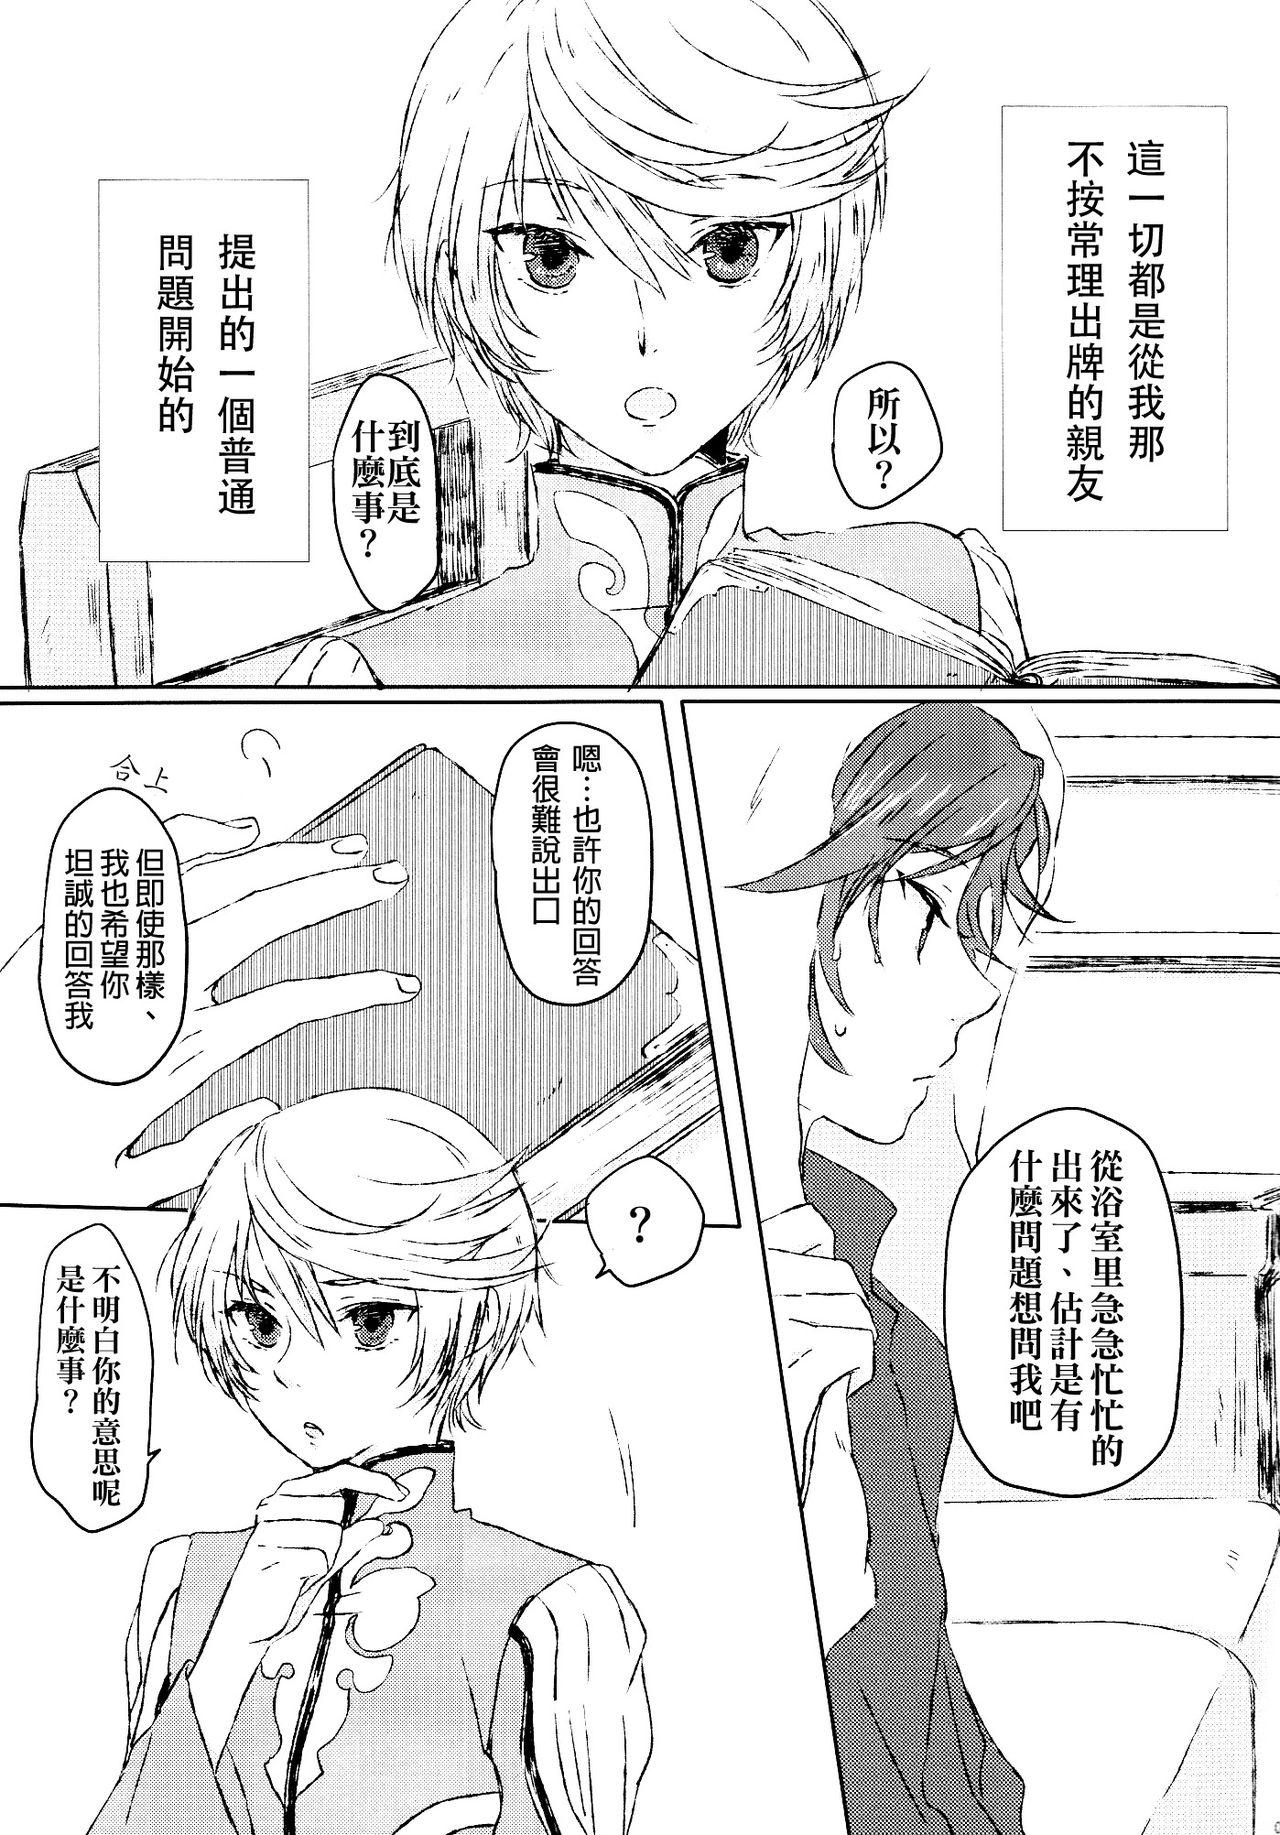 Tattoo Chiguhagu Syndrome - Tales of zestiria Hairy - Page 5